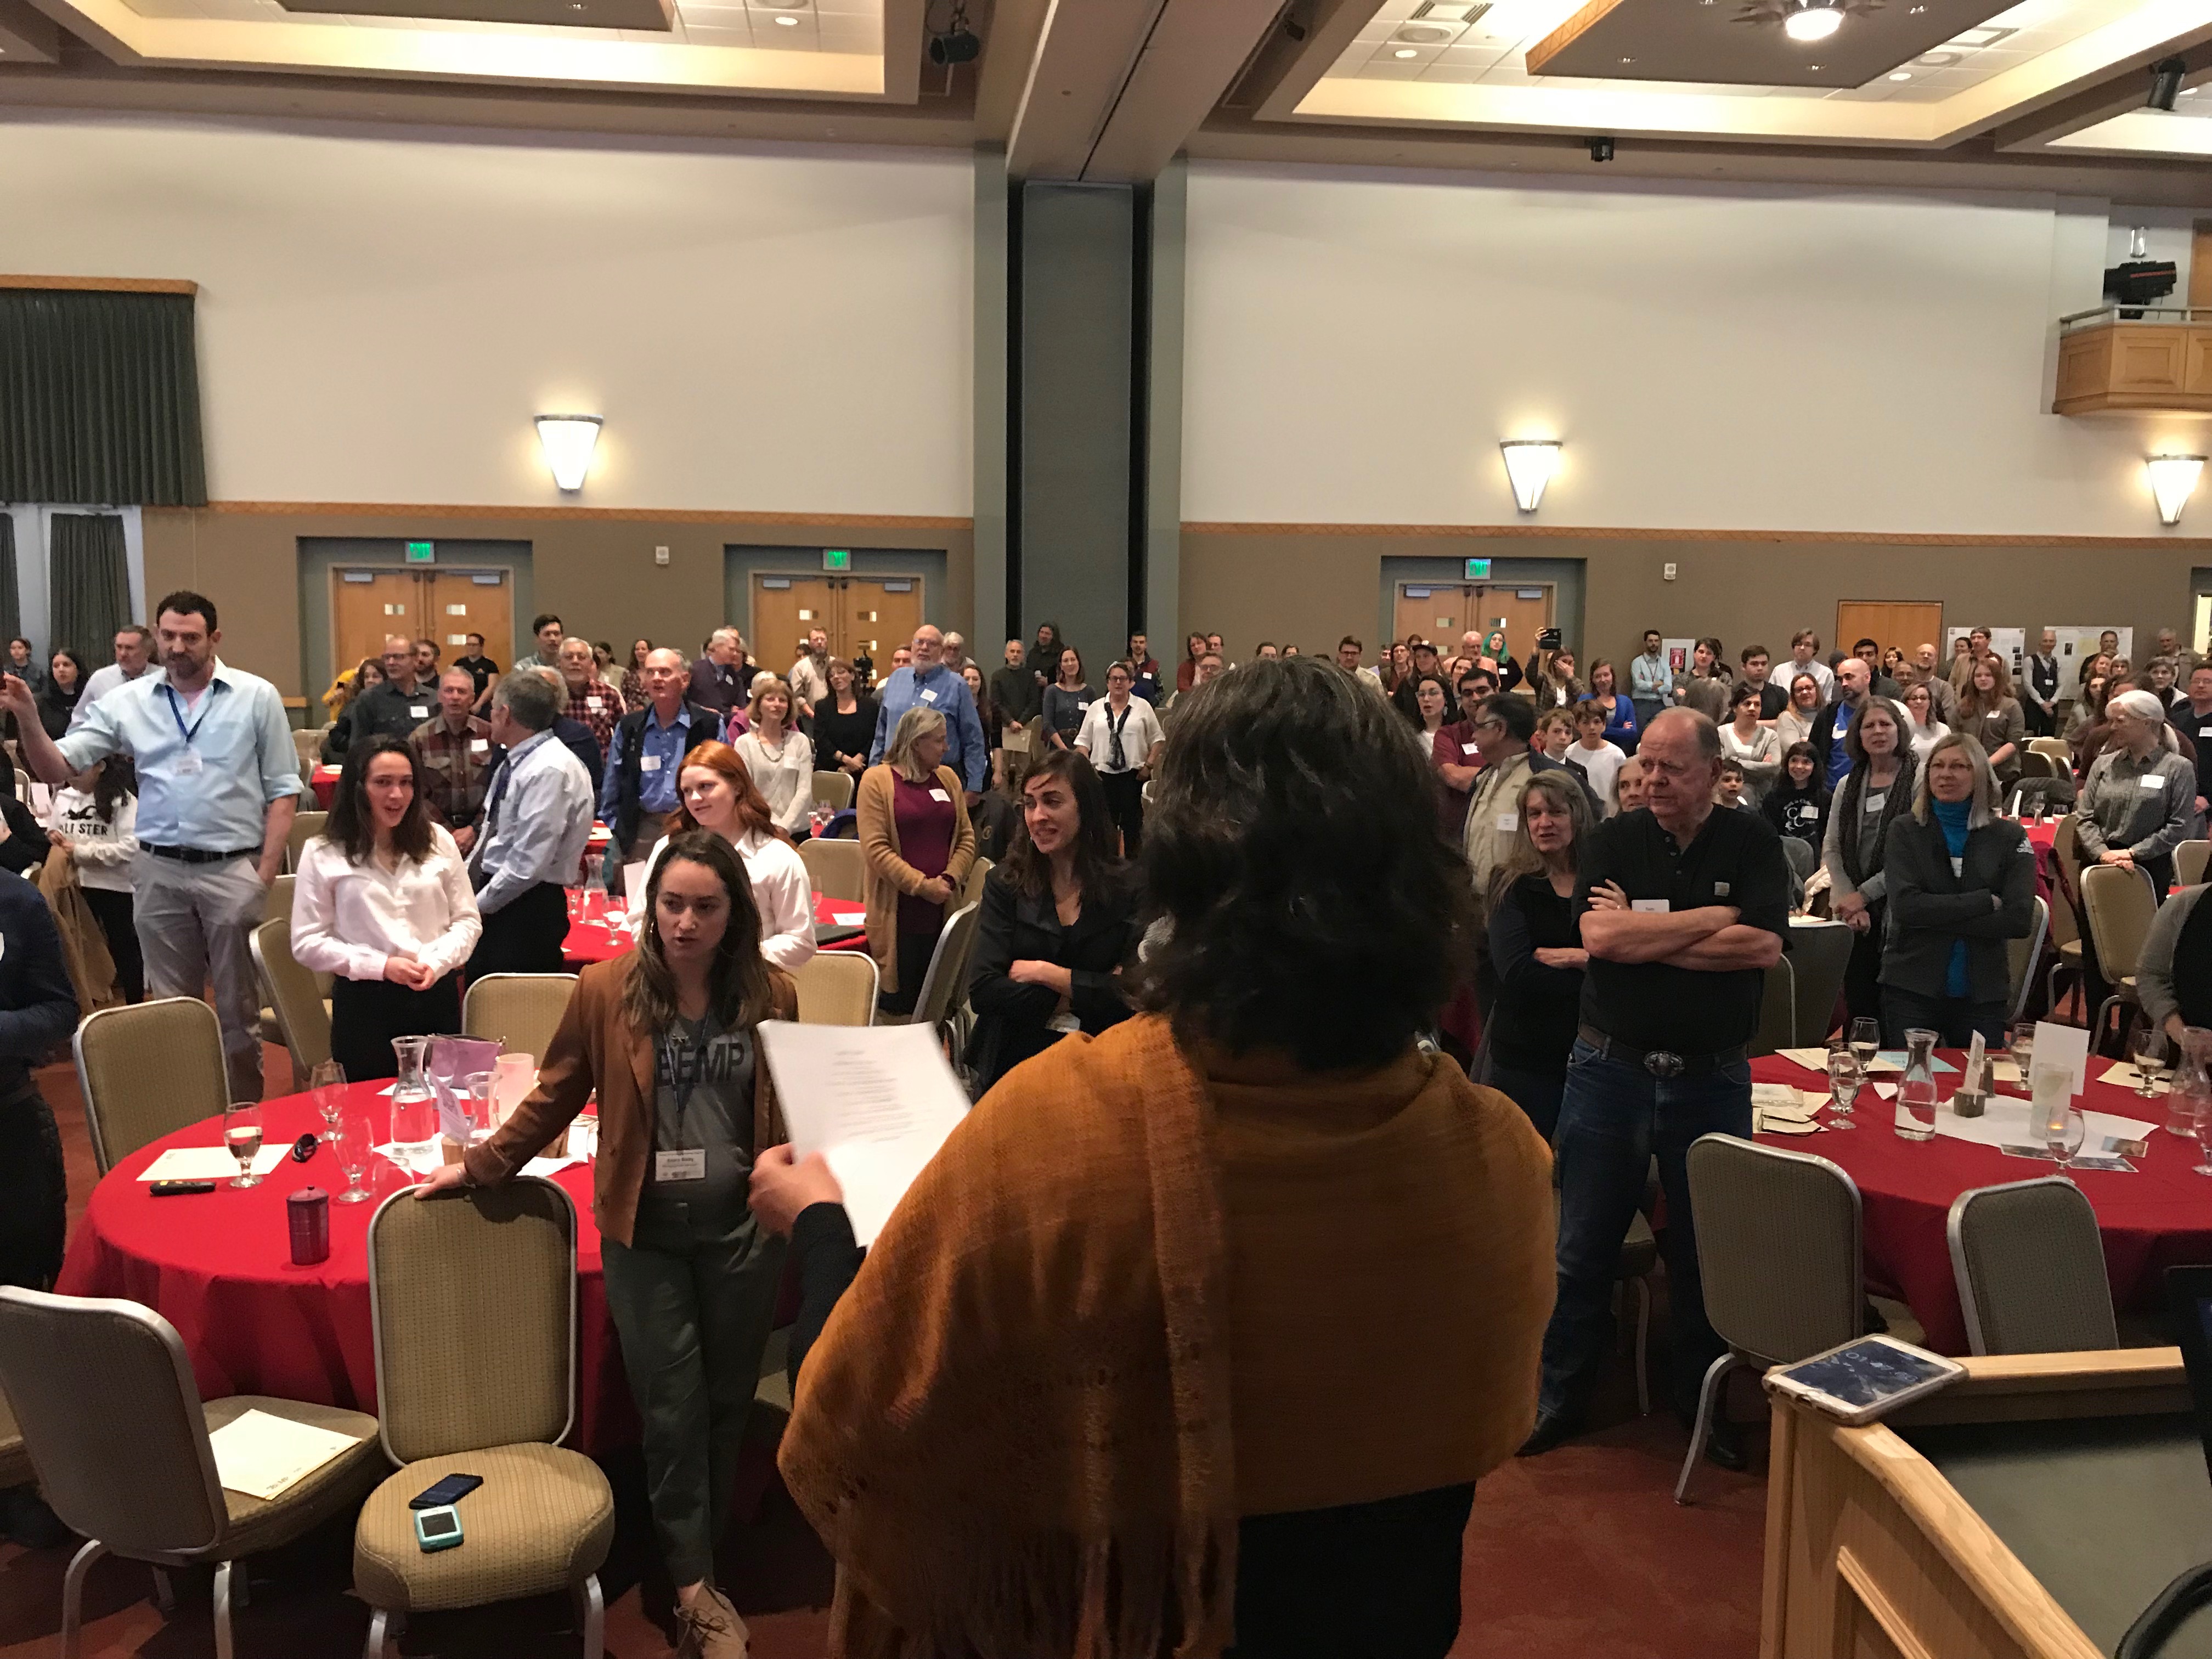 Crawford Symposium attendees participating in a poem with Albuquerque's Poet Laureate, Michelle Otero and Inez Elementary School BASS students. 